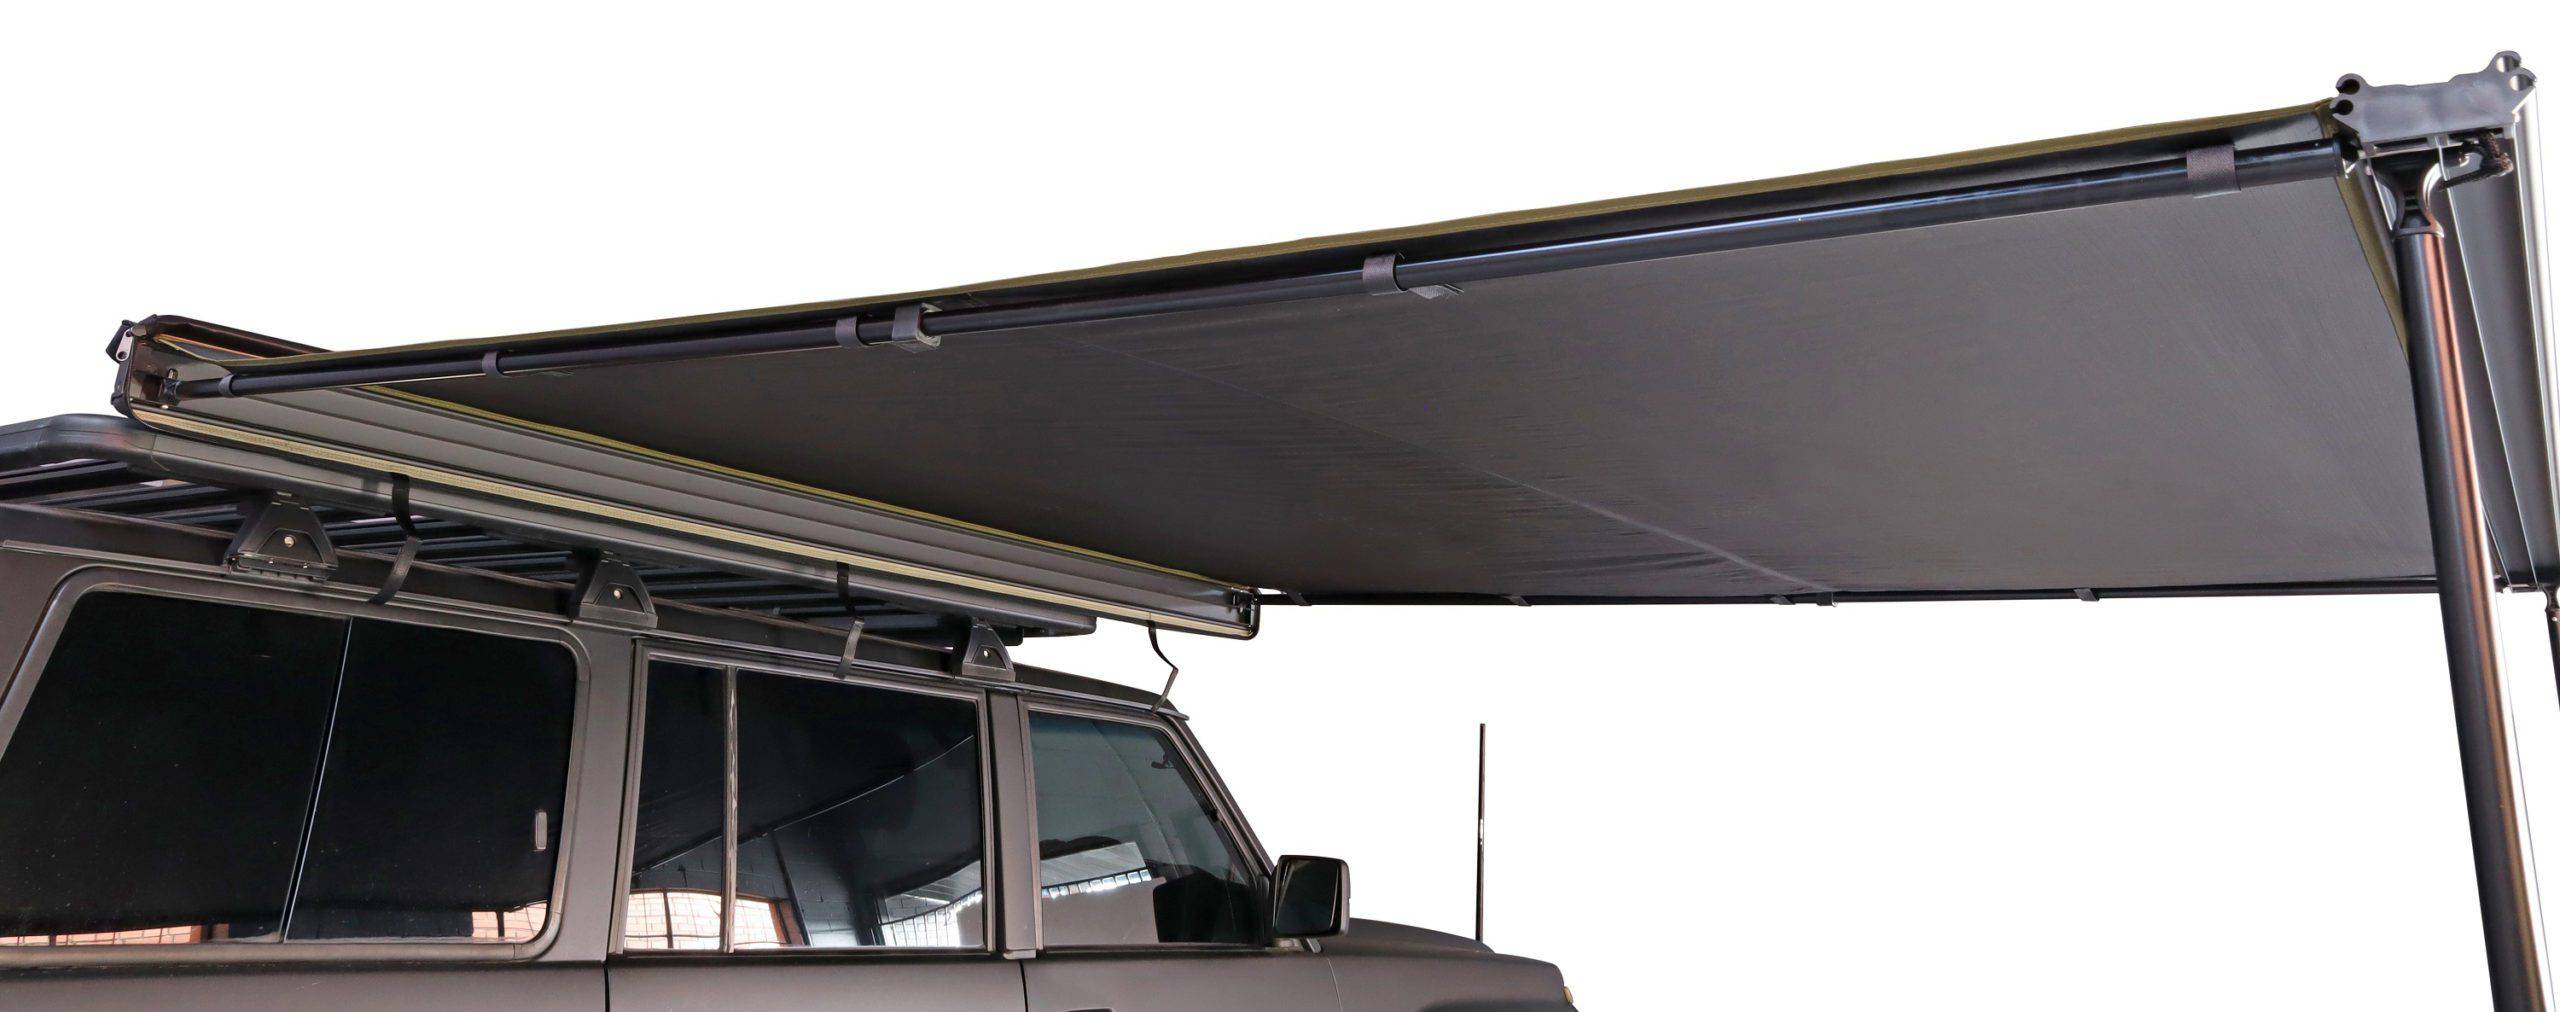 23Zero Raven 2500 (slimline) pull out side awning with LST | 23Zero